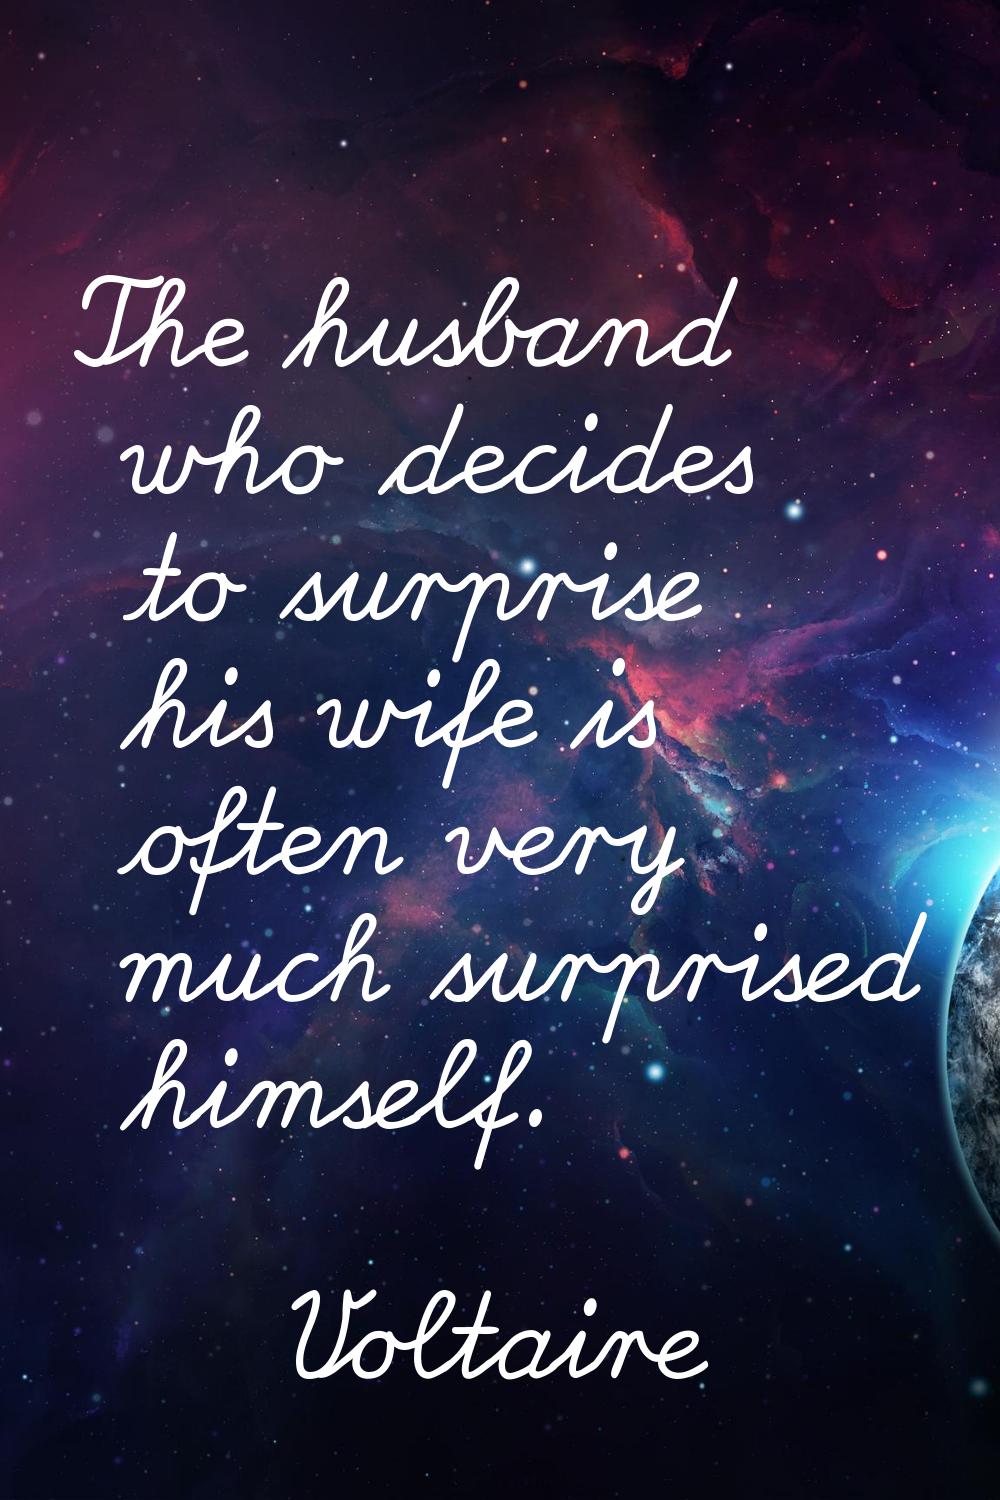 The husband who decides to surprise his wife is often very much surprised himself.